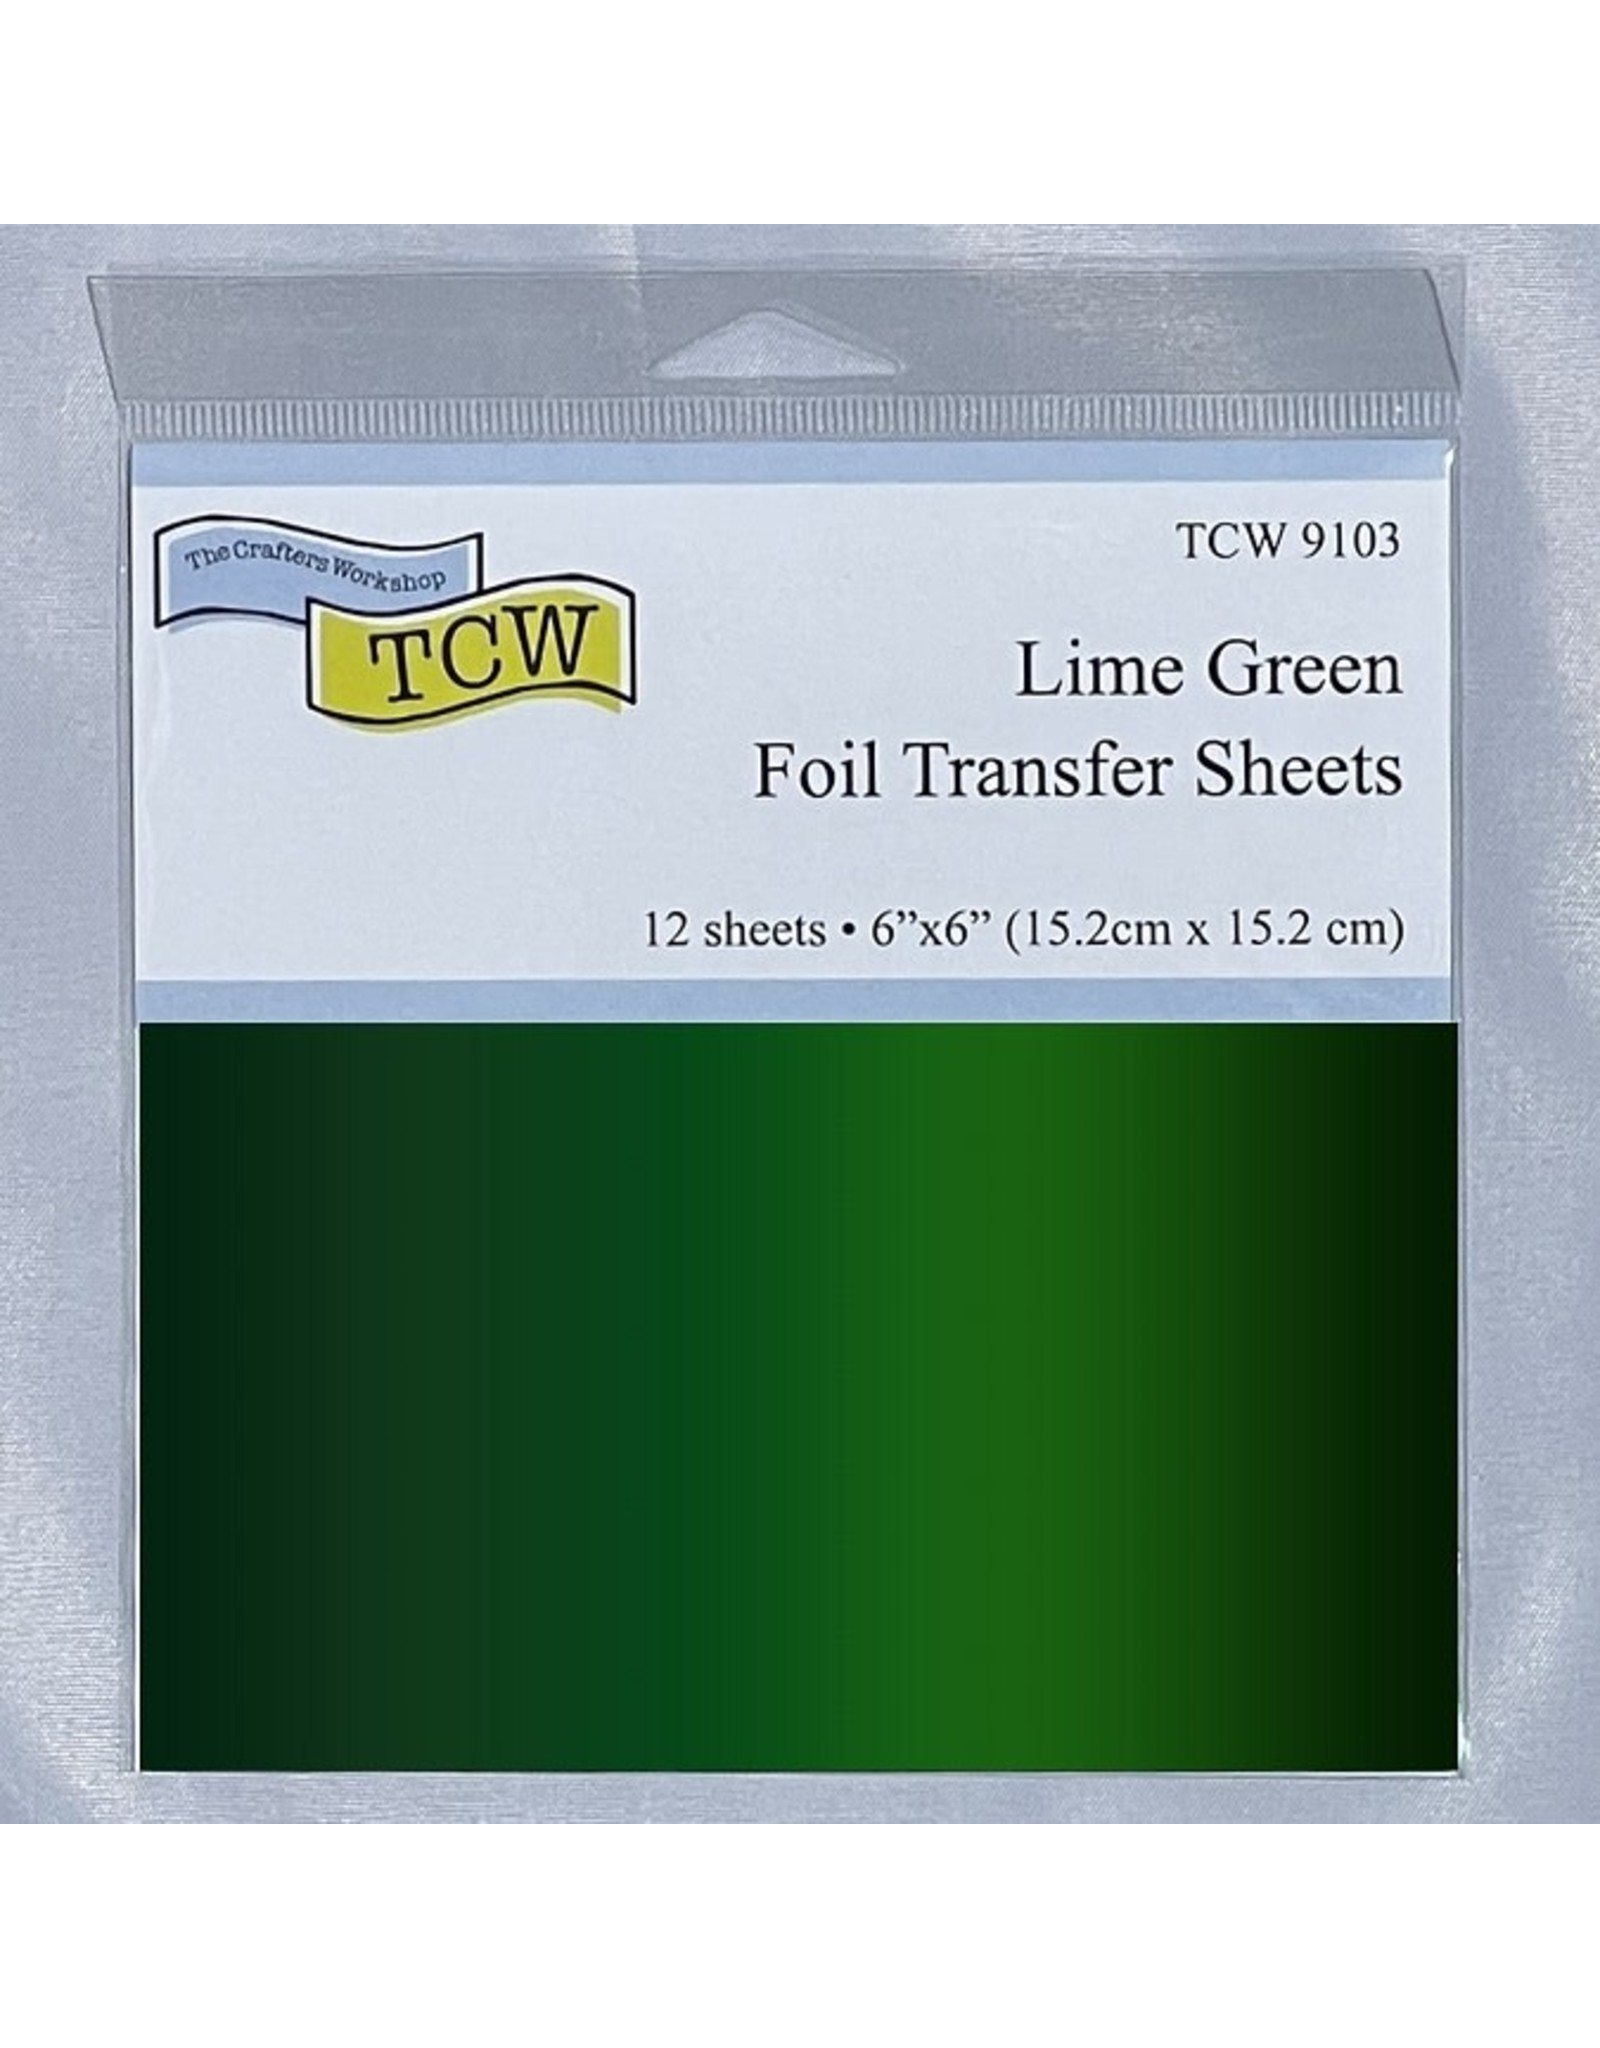 THE CRAFTERS WORKSHOP Foil Transfer Sheets 6x6 Lime Green